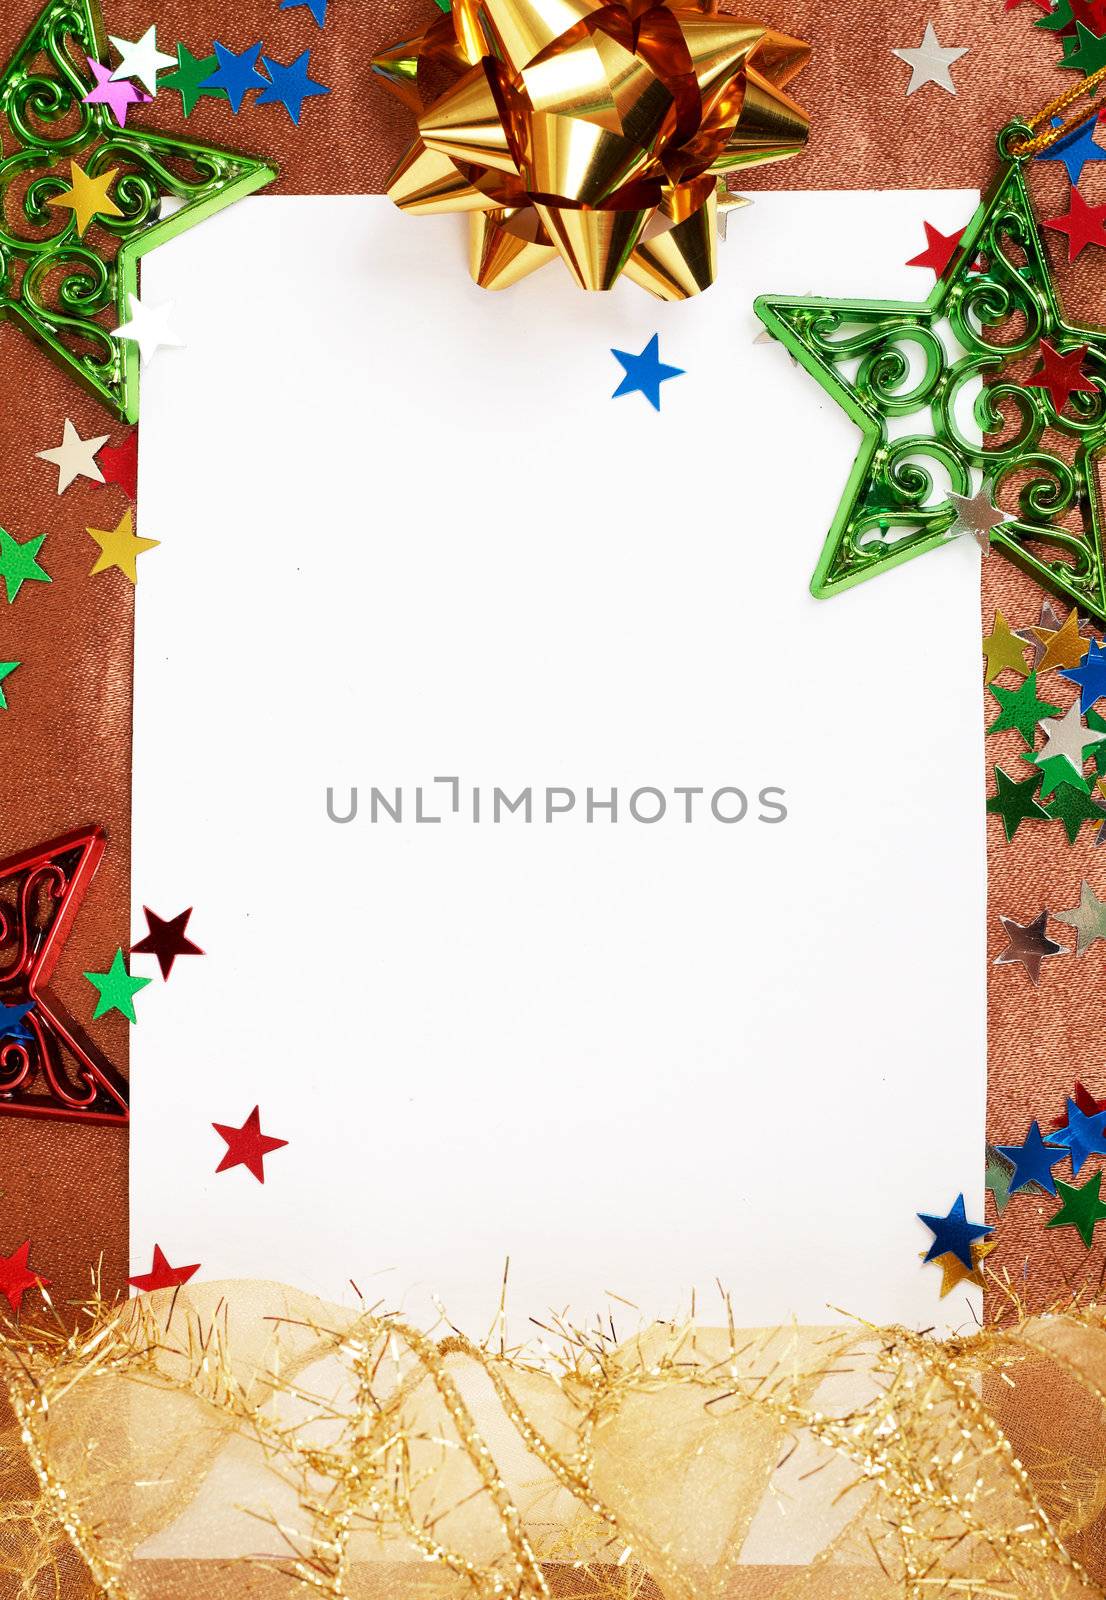 White Christmas card with colorful decorations